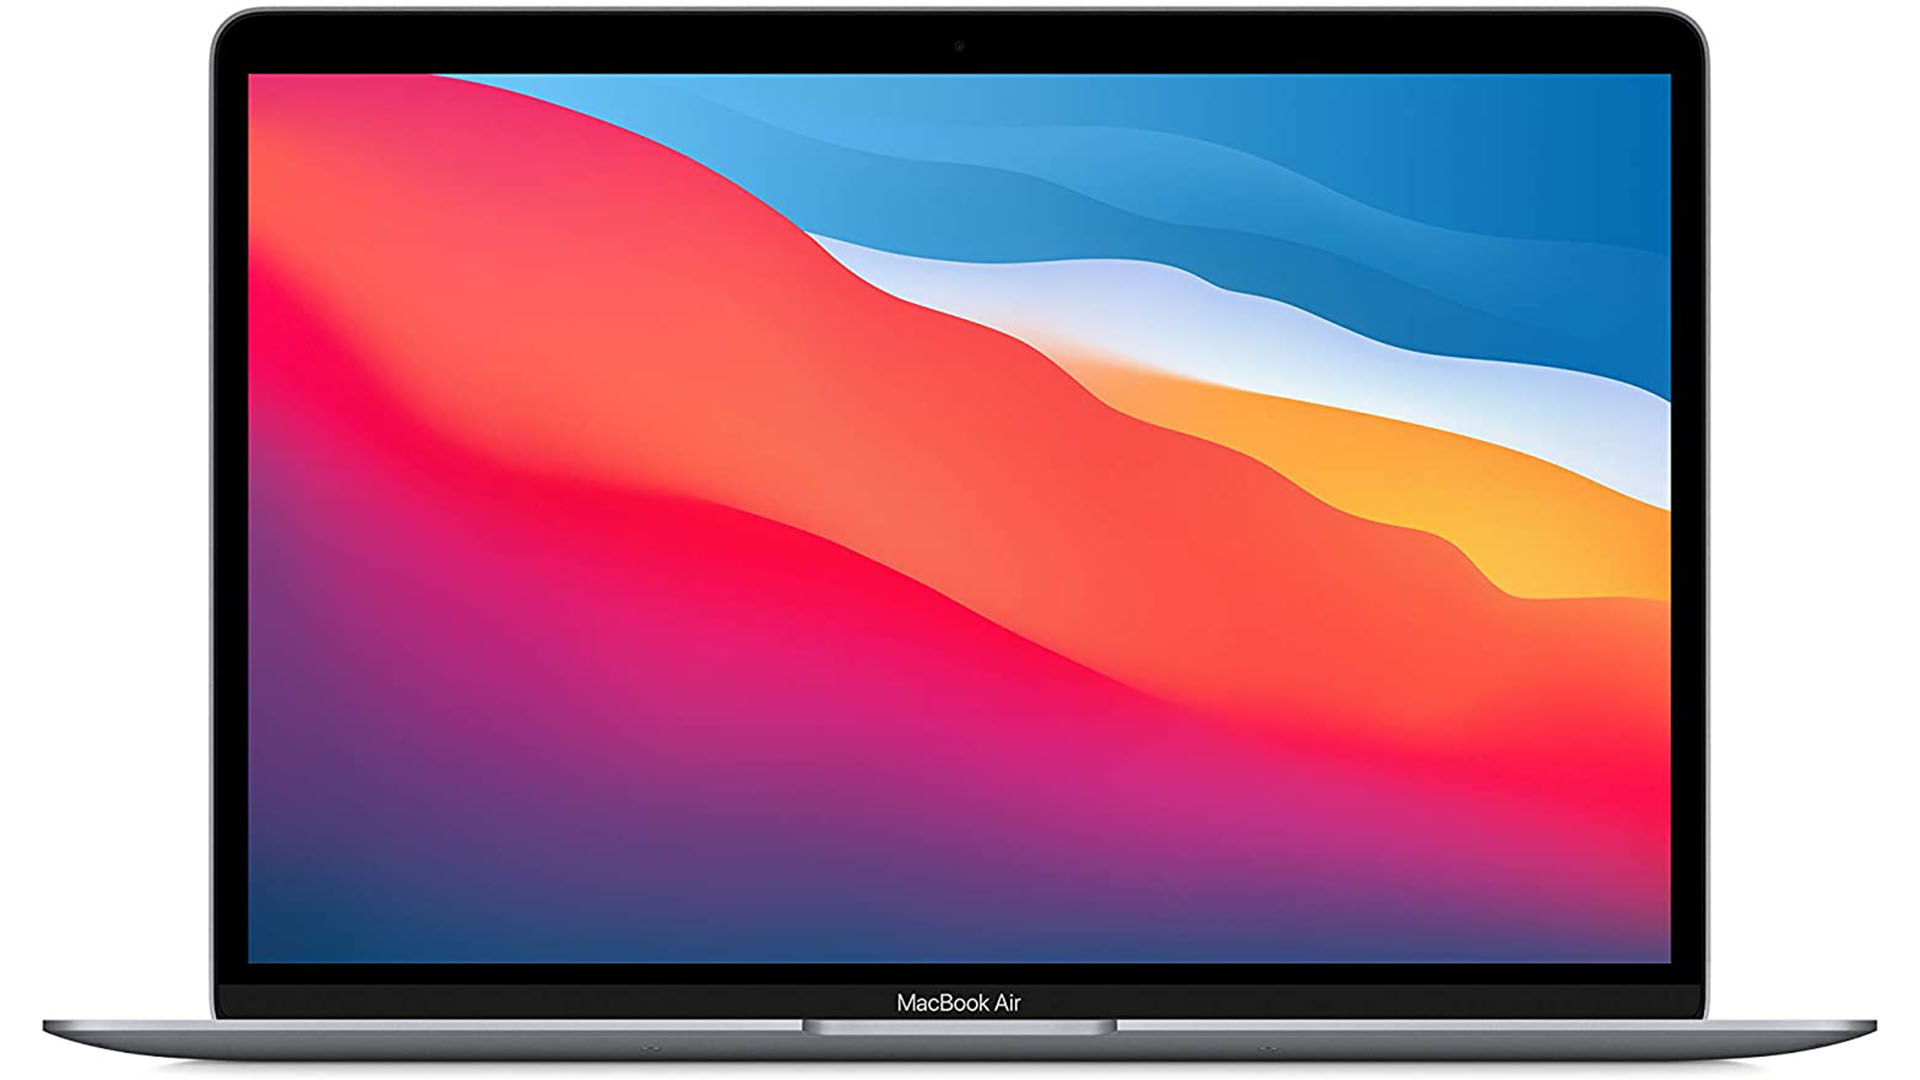 This MacBook Air M1 deal is the cheapest way to get a new MacBook right now